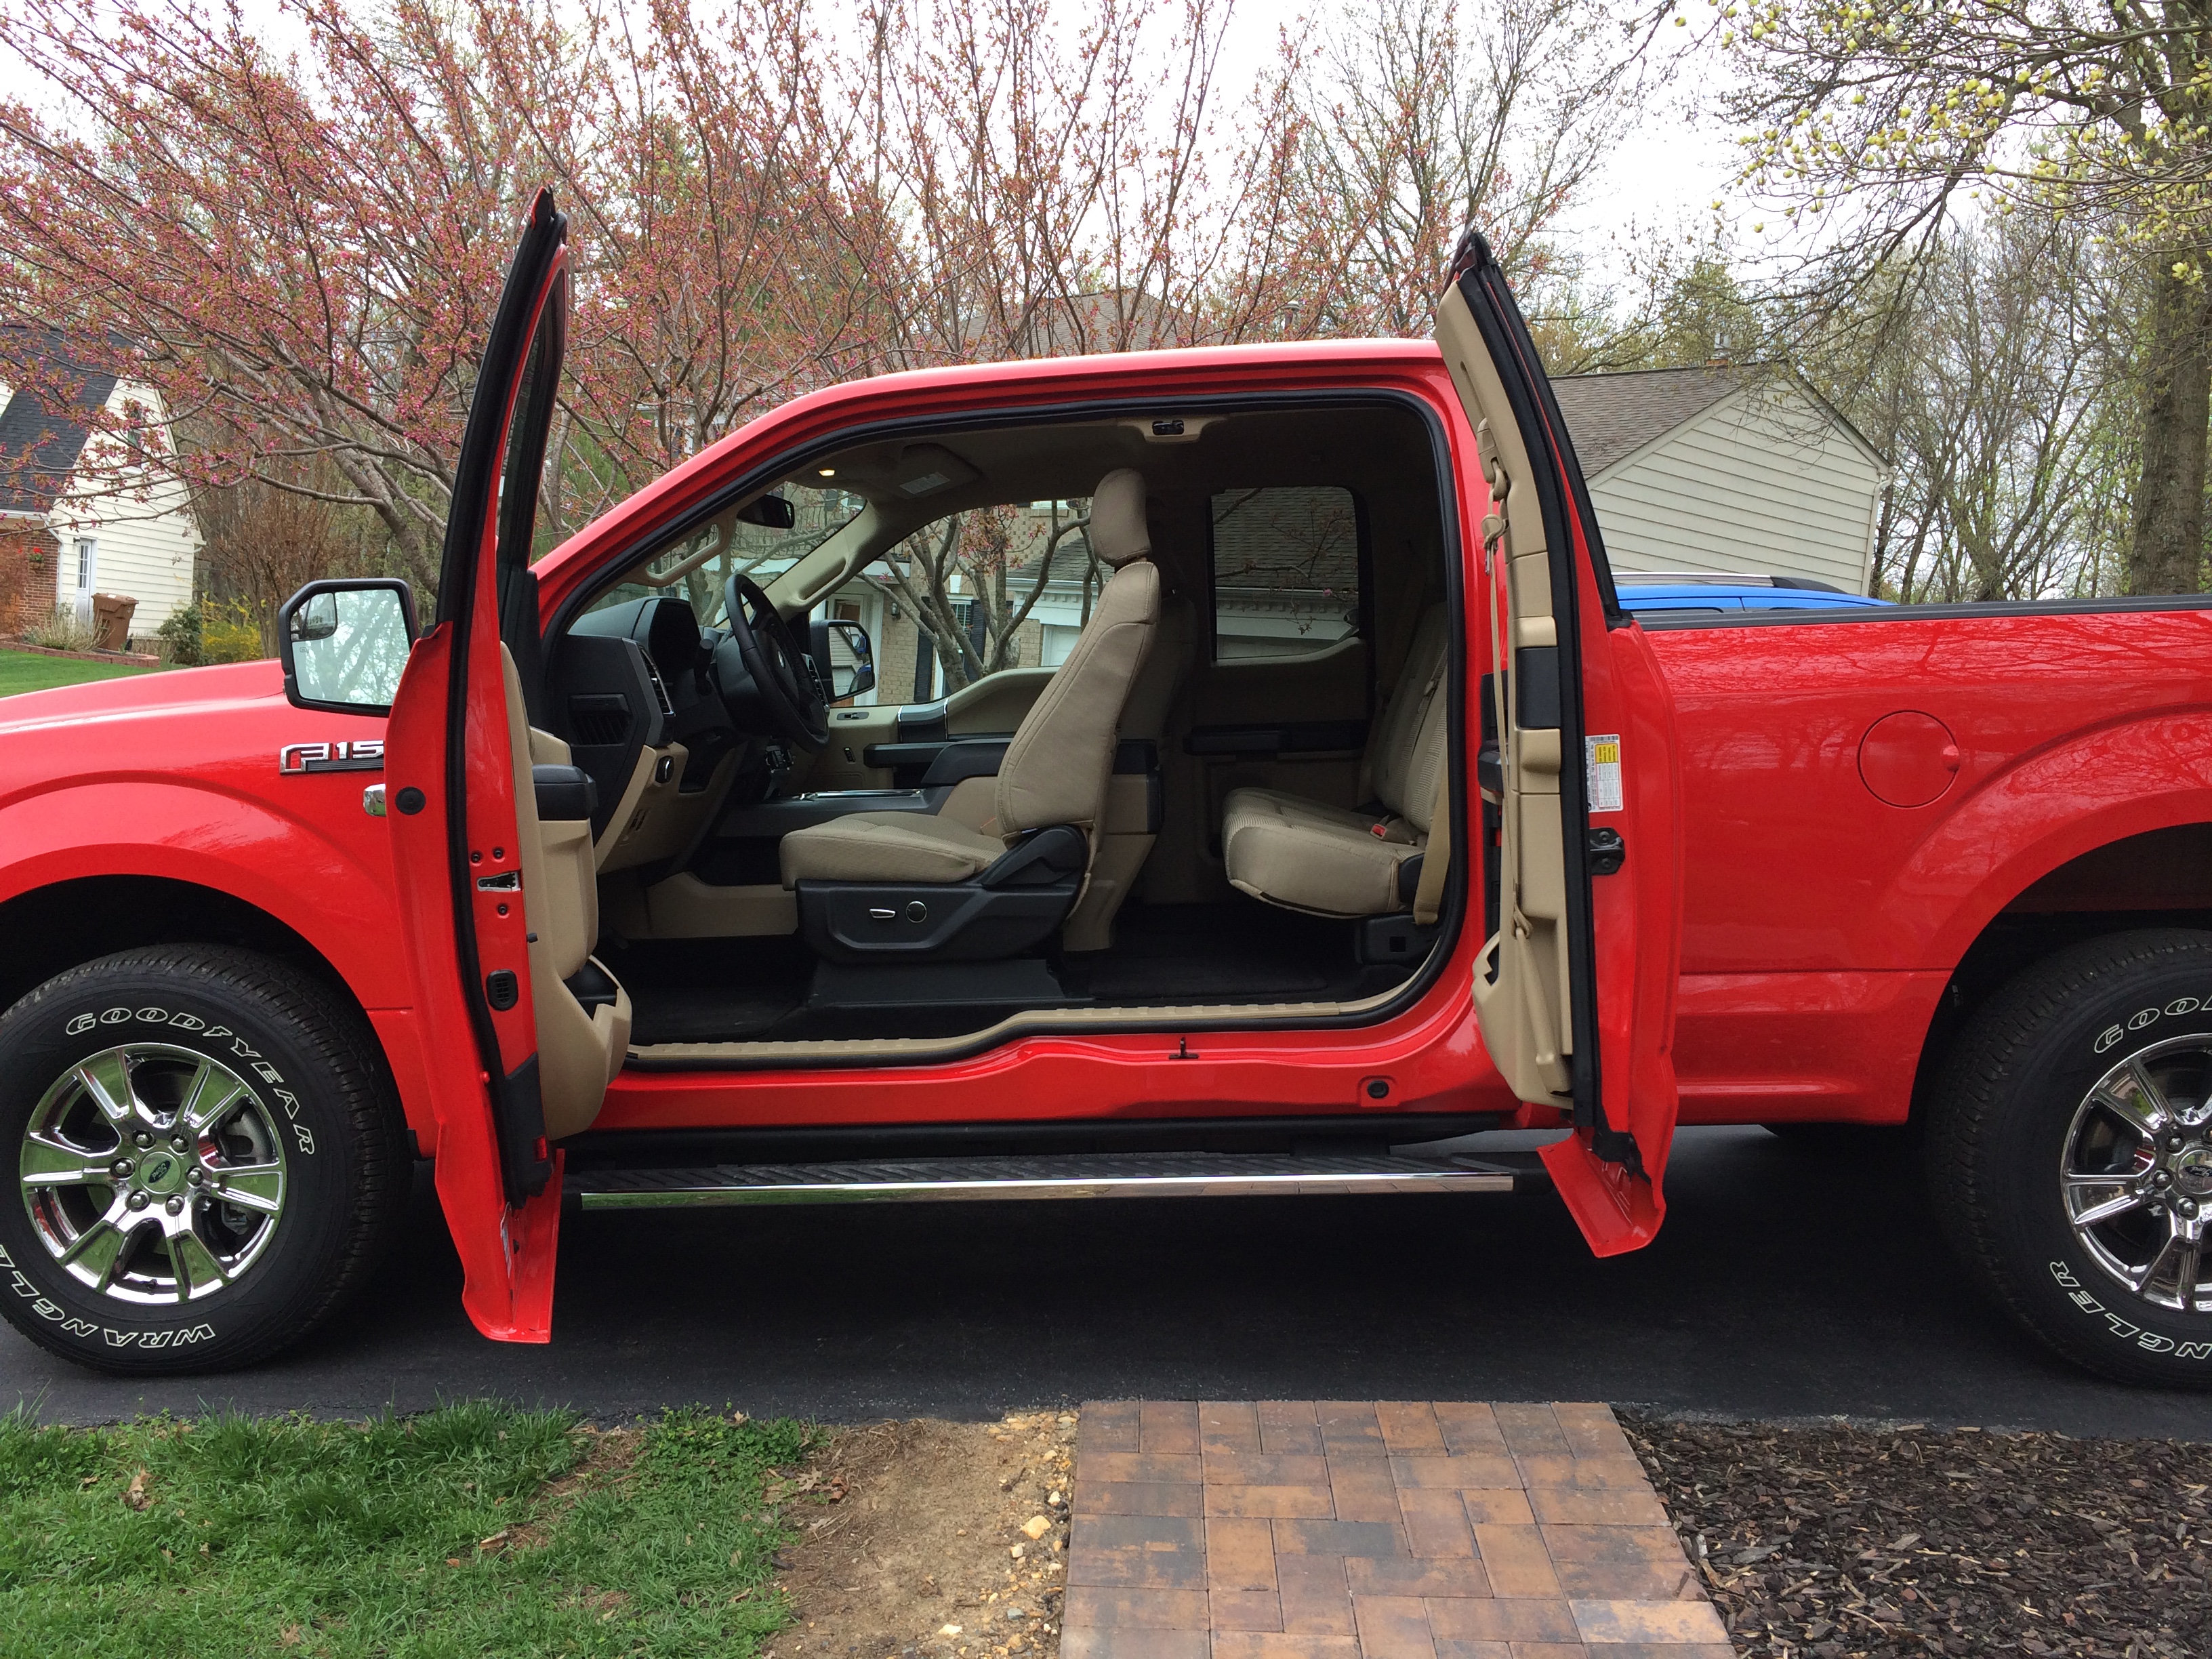 Car Report: The most popular Ford F-150 gets a slim-down makeover